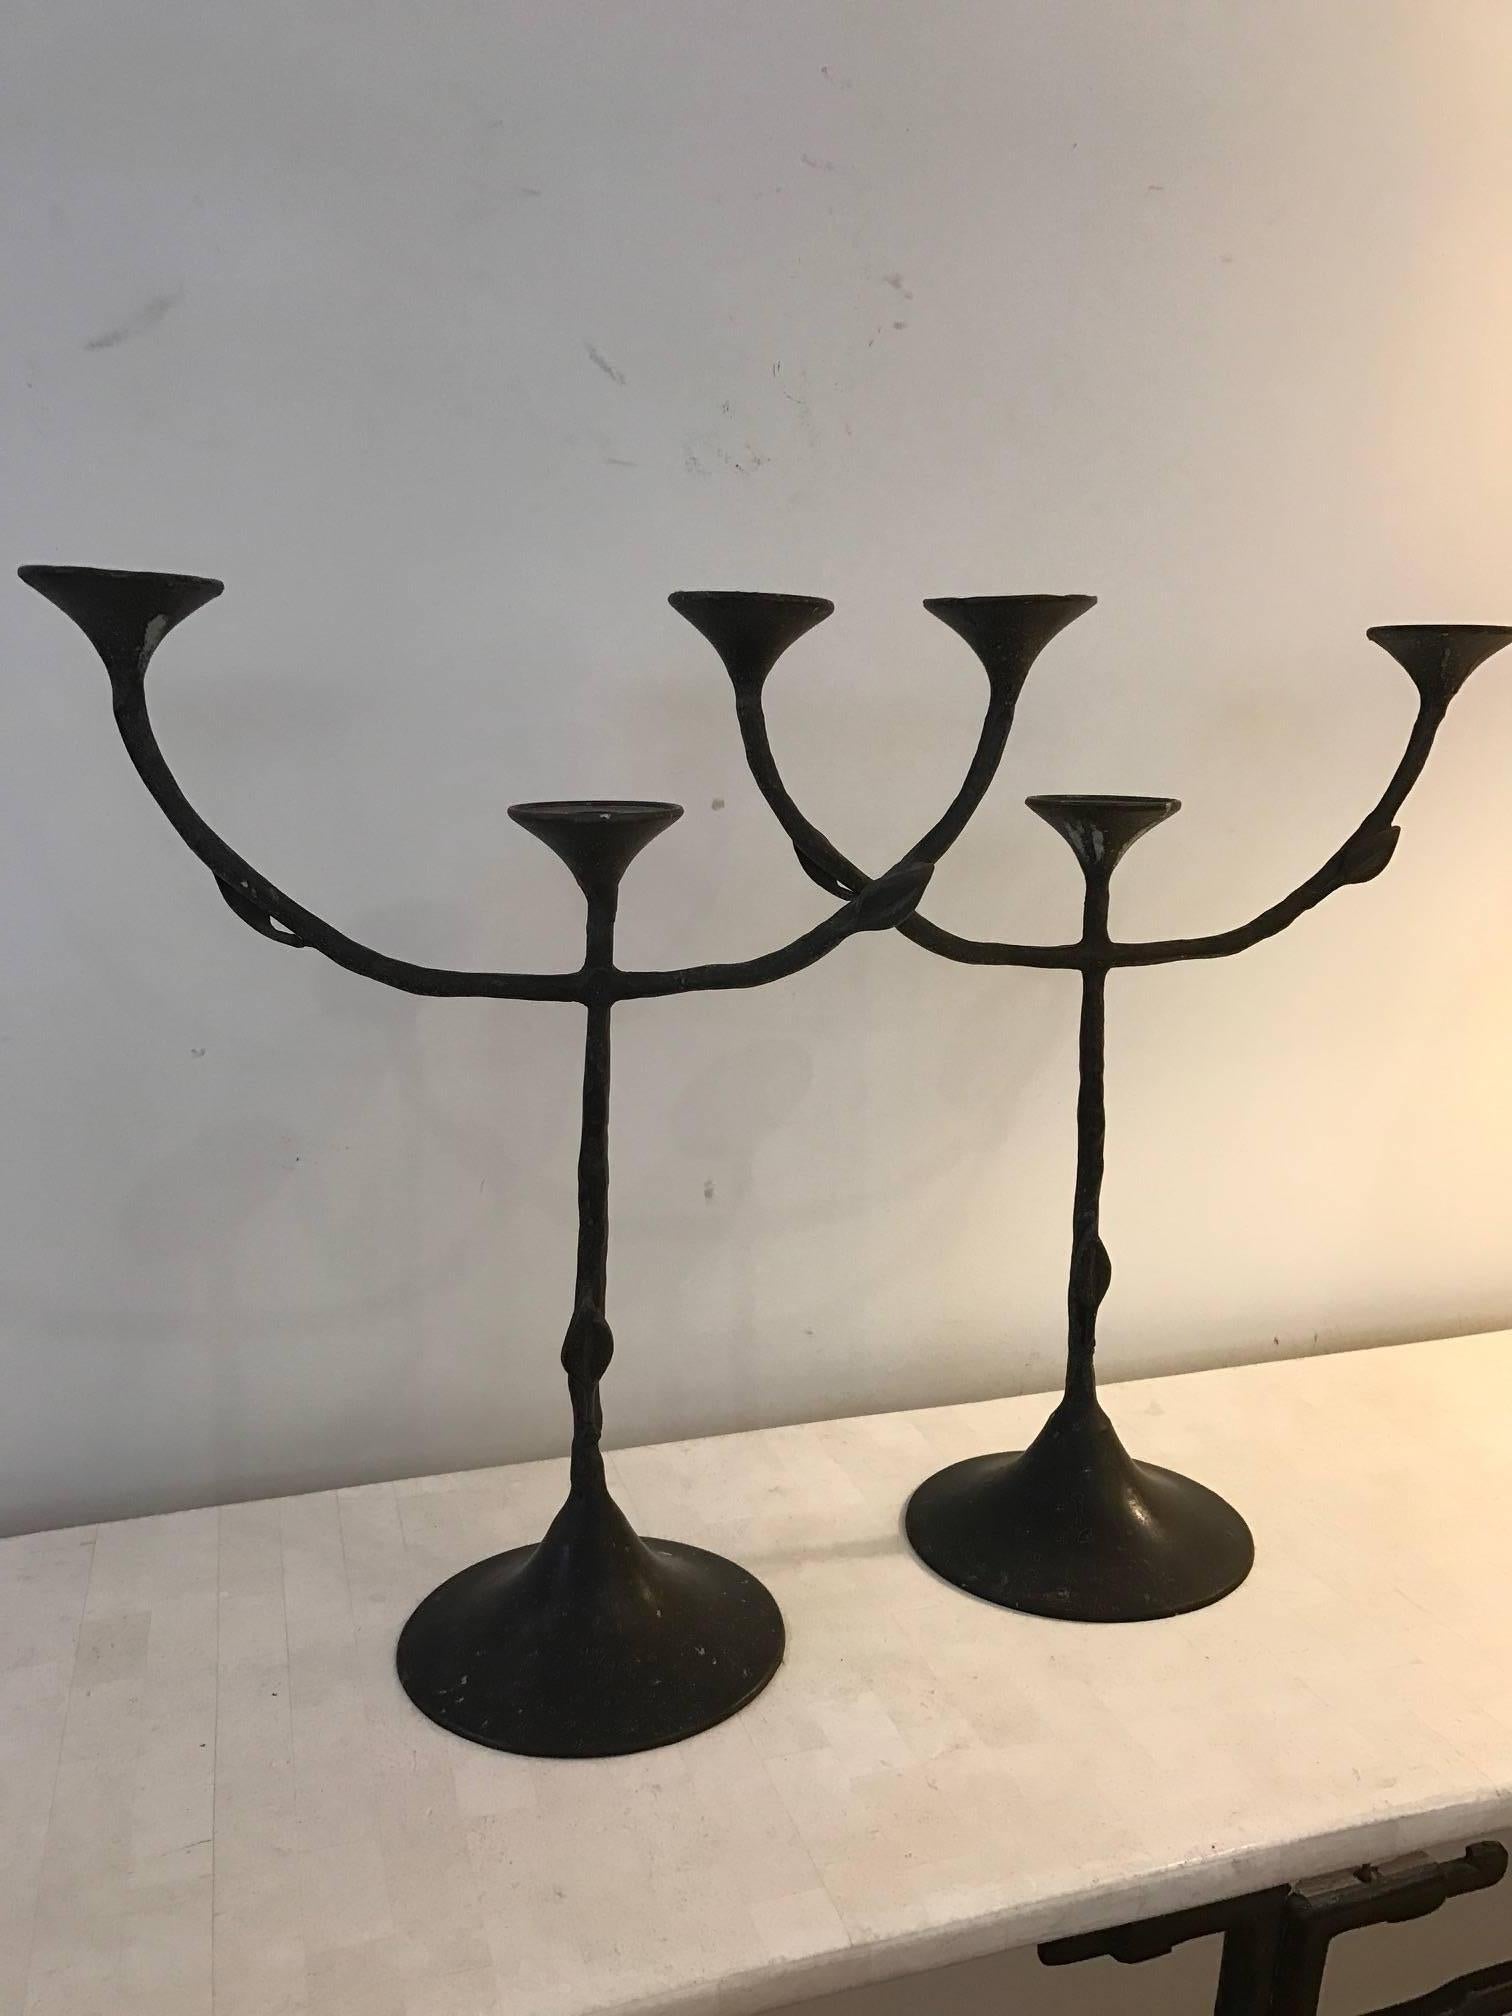 A pair of hand-wrought bronze three-arm candlesticks in the manner of Giacometti.
The arms and the base have an applied iron leaf decoration.